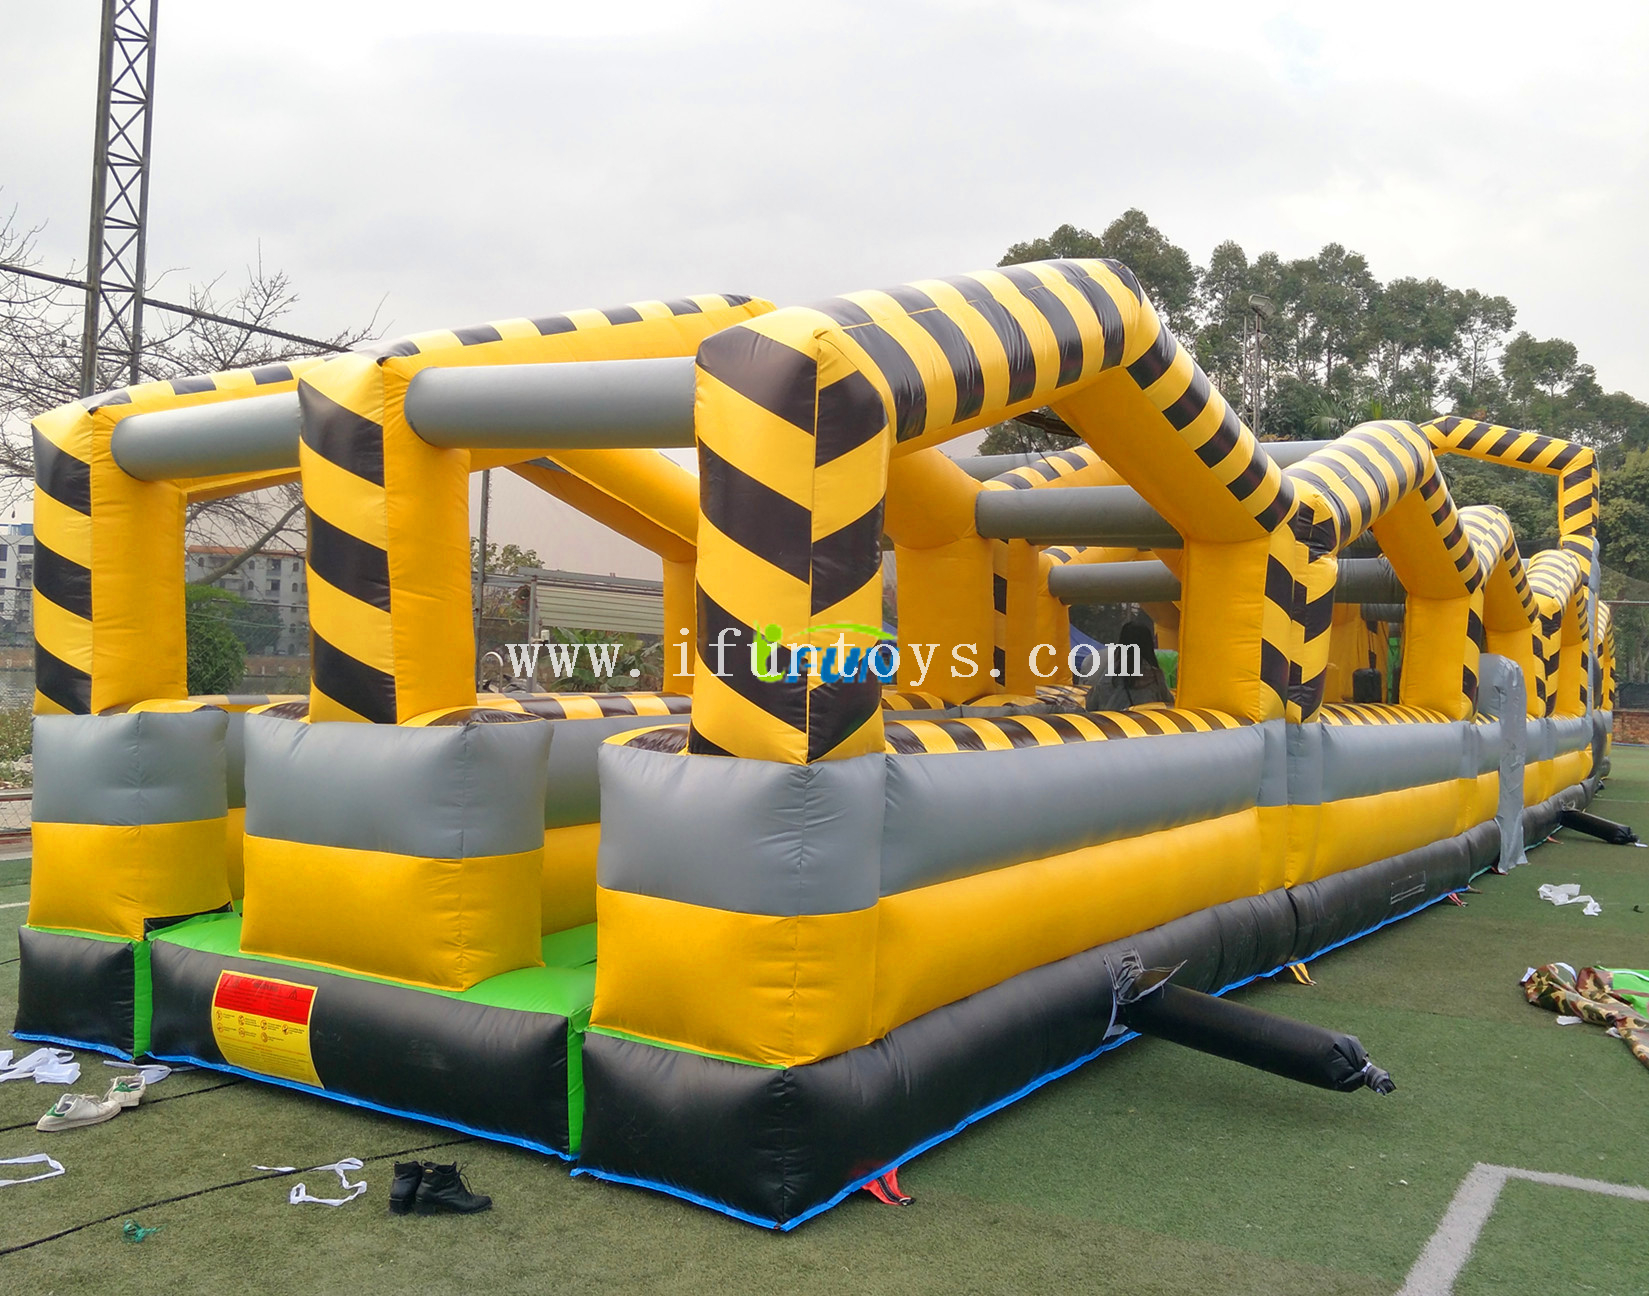 Toxic Rampage cheap outdoor 32m long inflatable obstacle course/Toxic rush inflatable obstacle/inflatable wipeout sport game